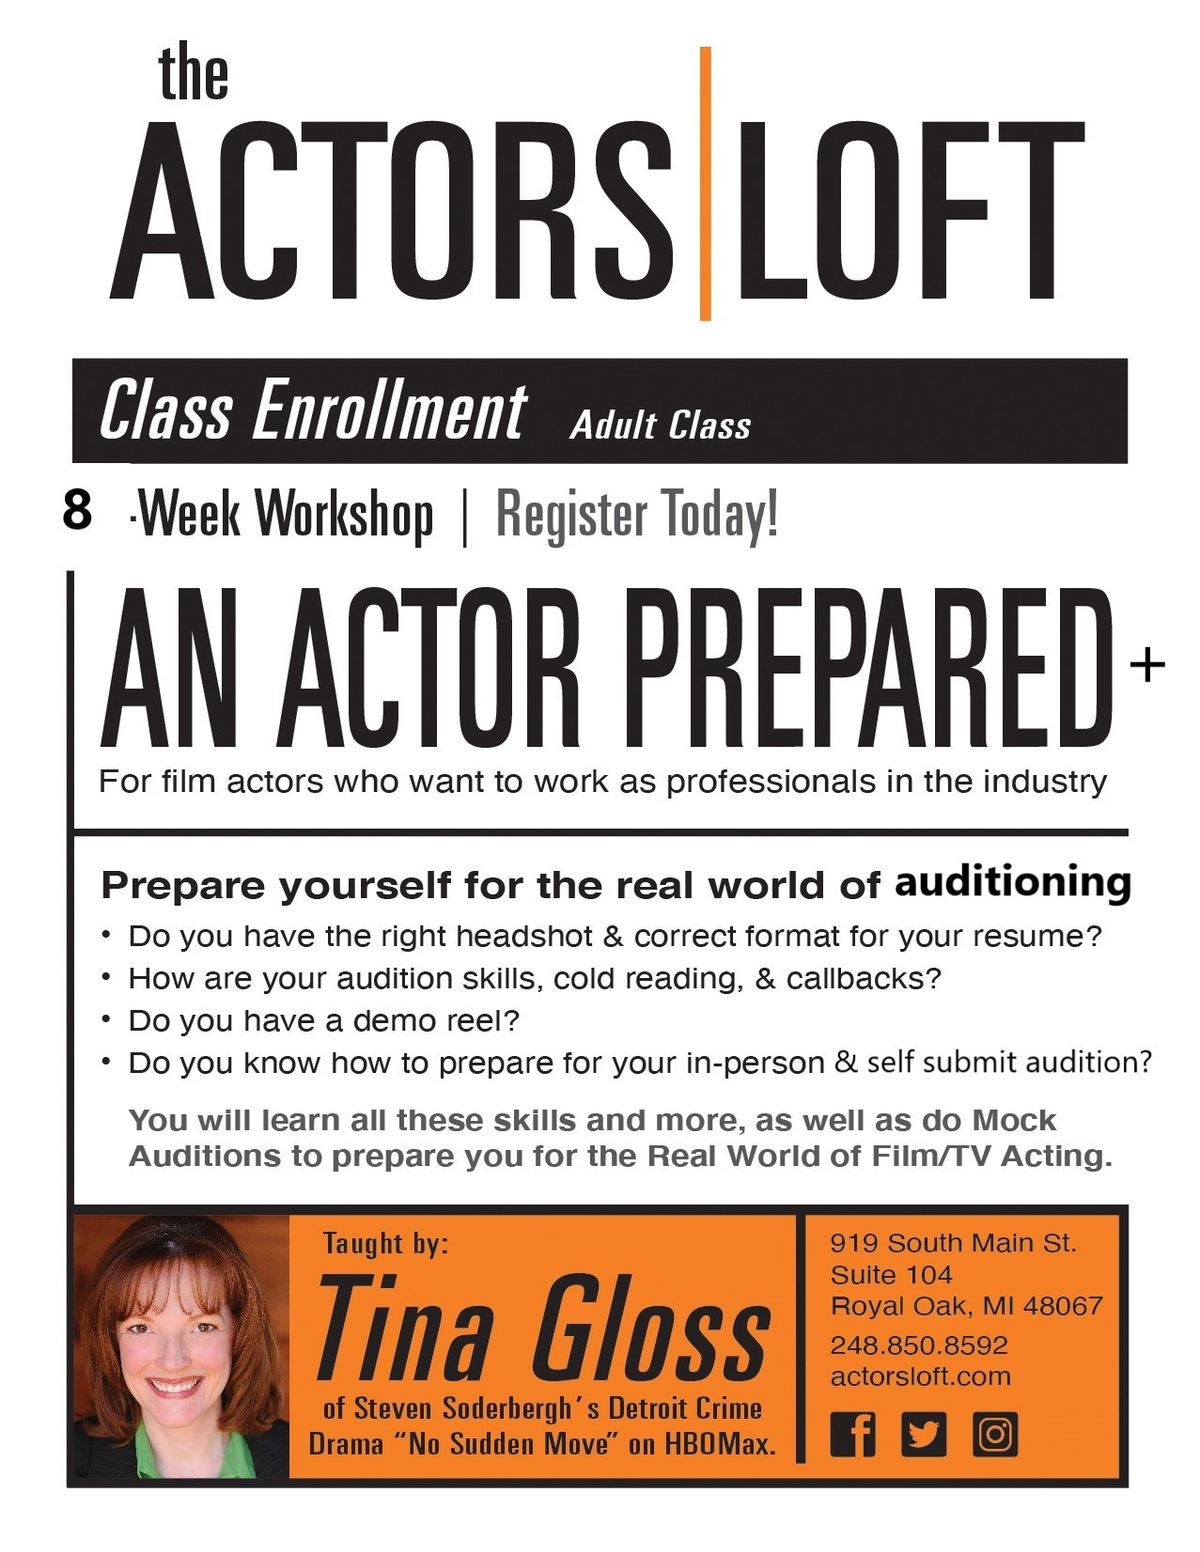 An Actor Prepared + Self Submit (Marketing & Audition Class) MUST EMAIL TO REGISTER, see below